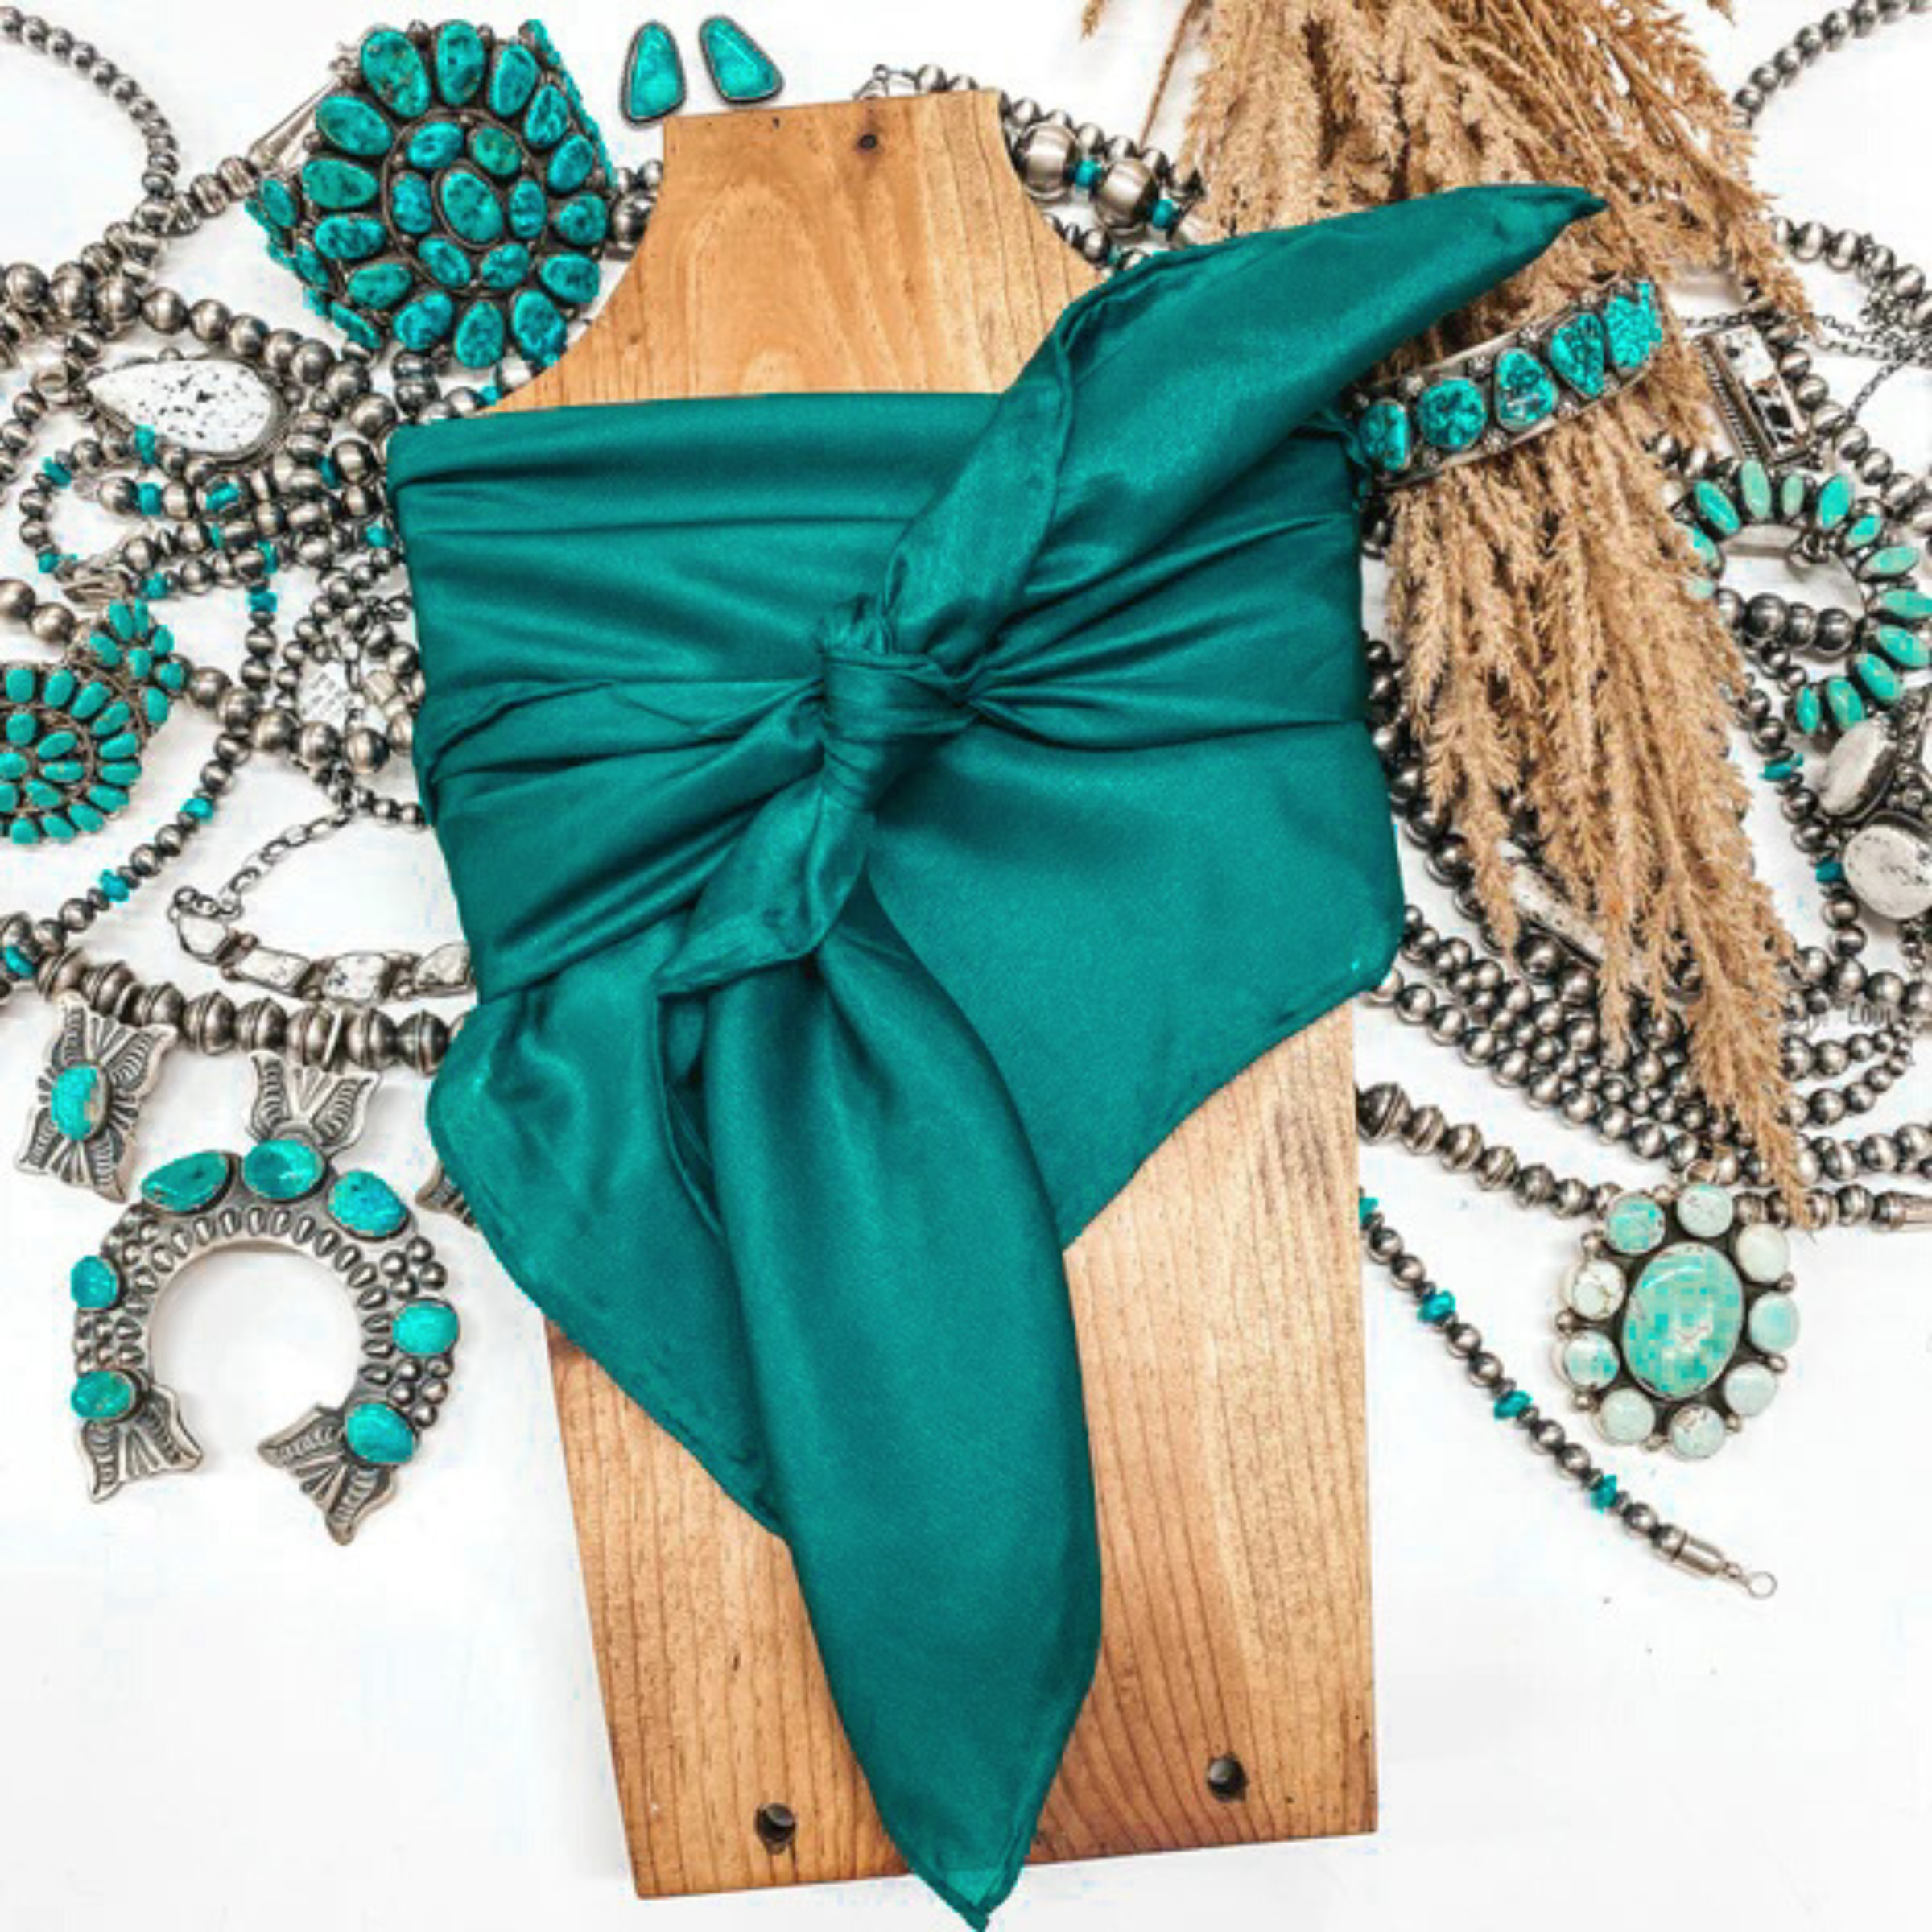 This is a teal silk wild rag, this wild rag is pictured wrapped around a brown necklace board. This wild rag is pictured on a white background and with silver and turquoise Navajo jewelry behind it as decoration.